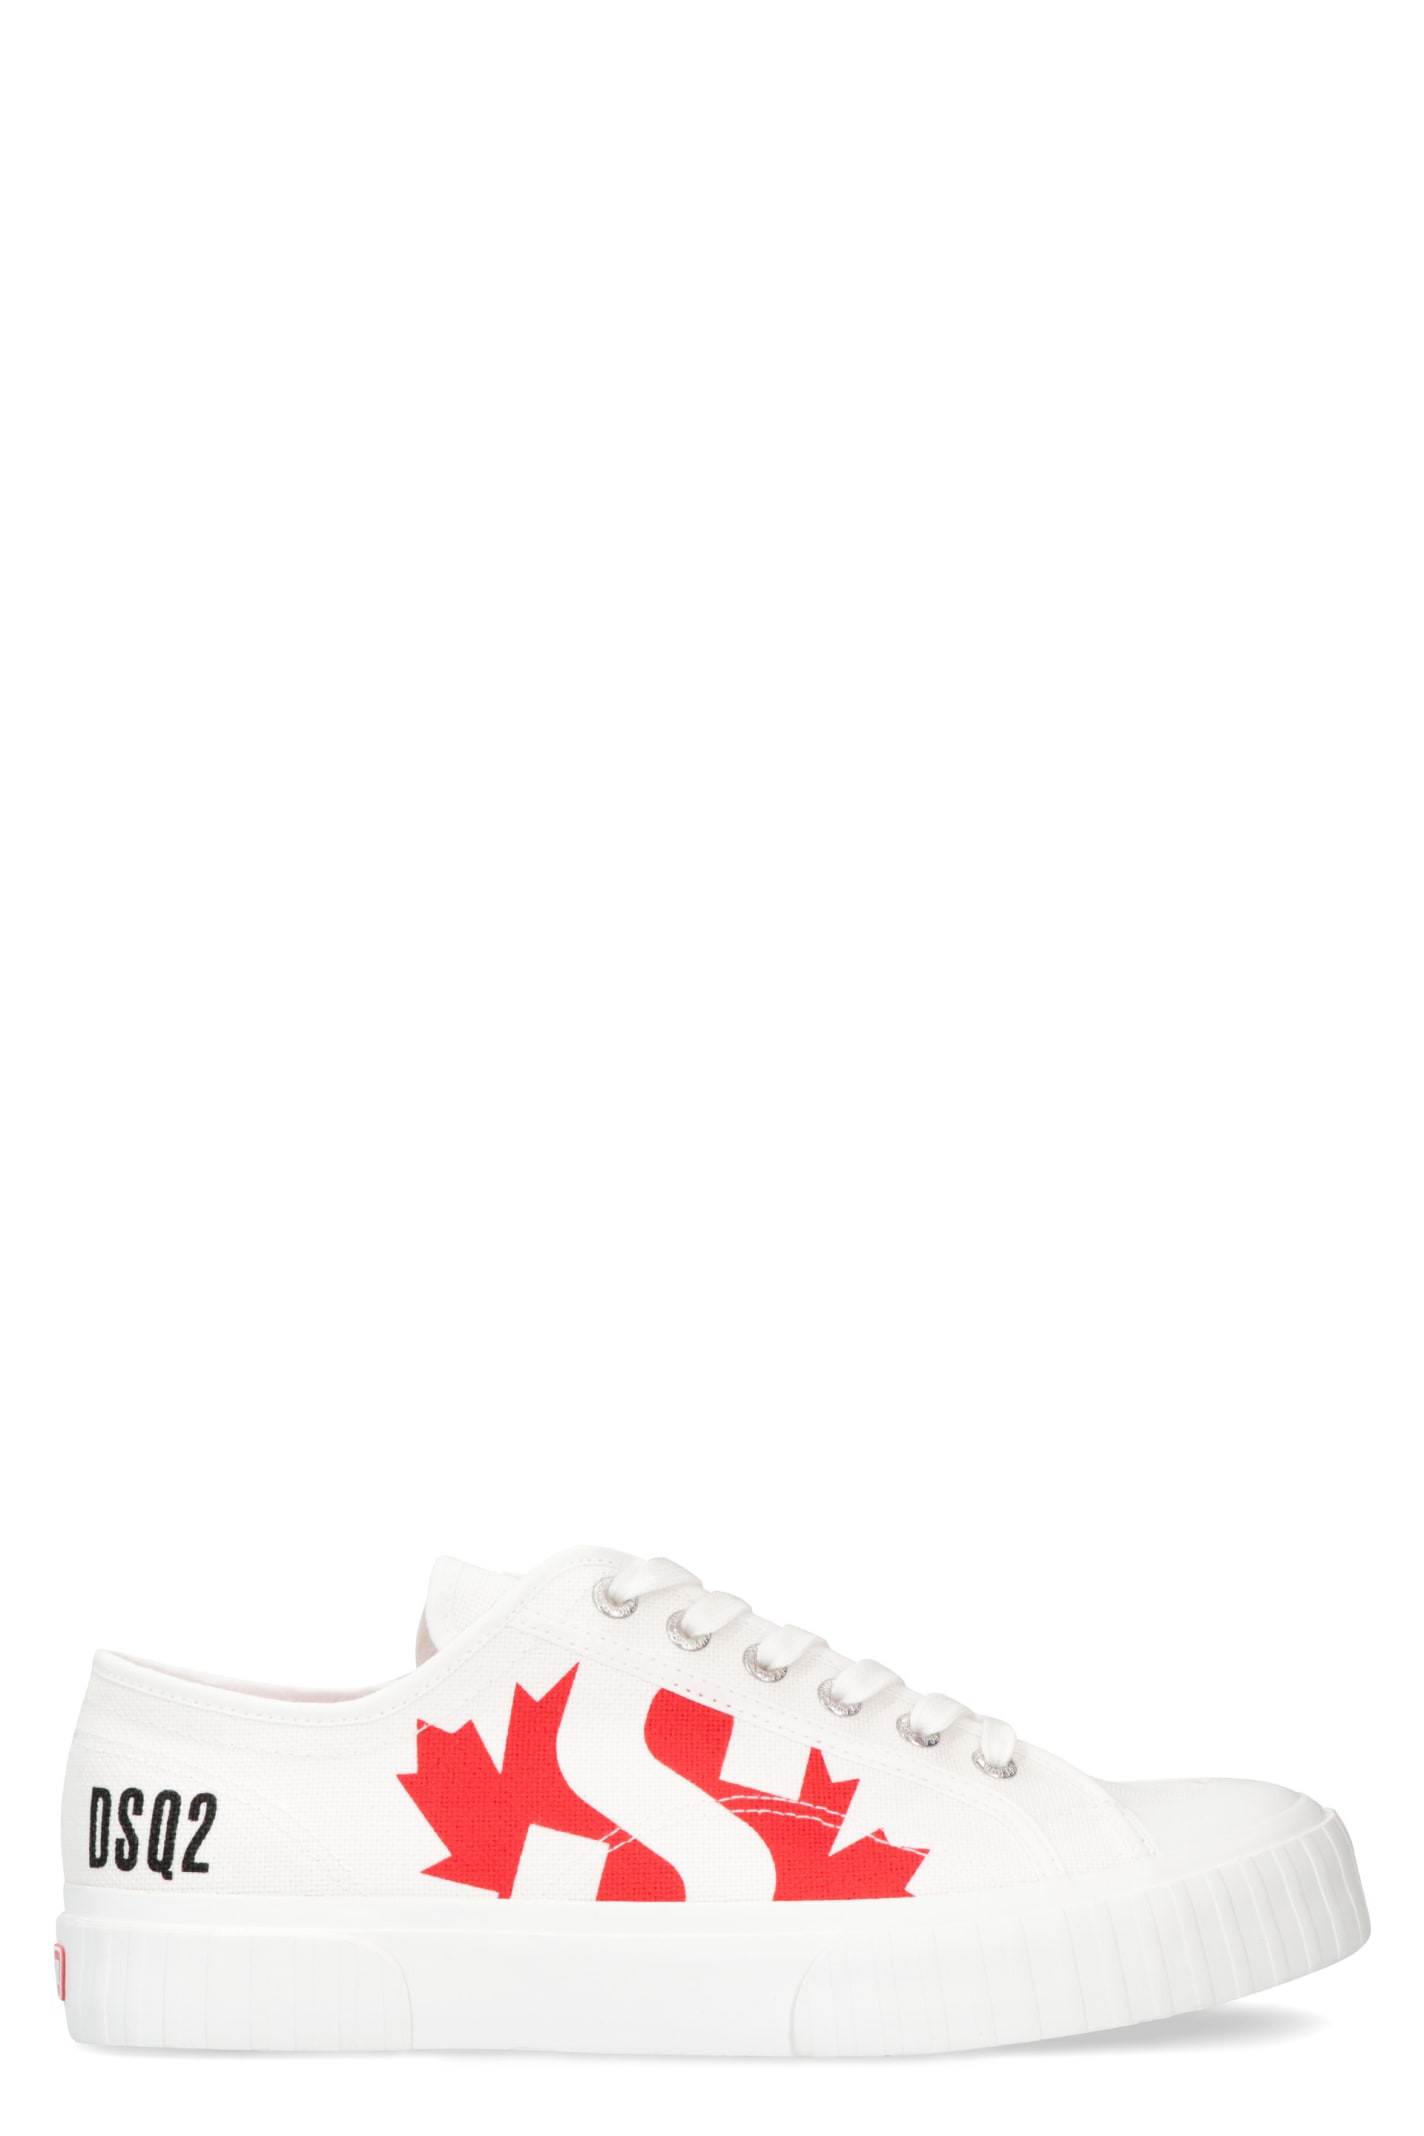 Dsquared2 Canvas Low-top Sneakers - Superga X Dsquared2